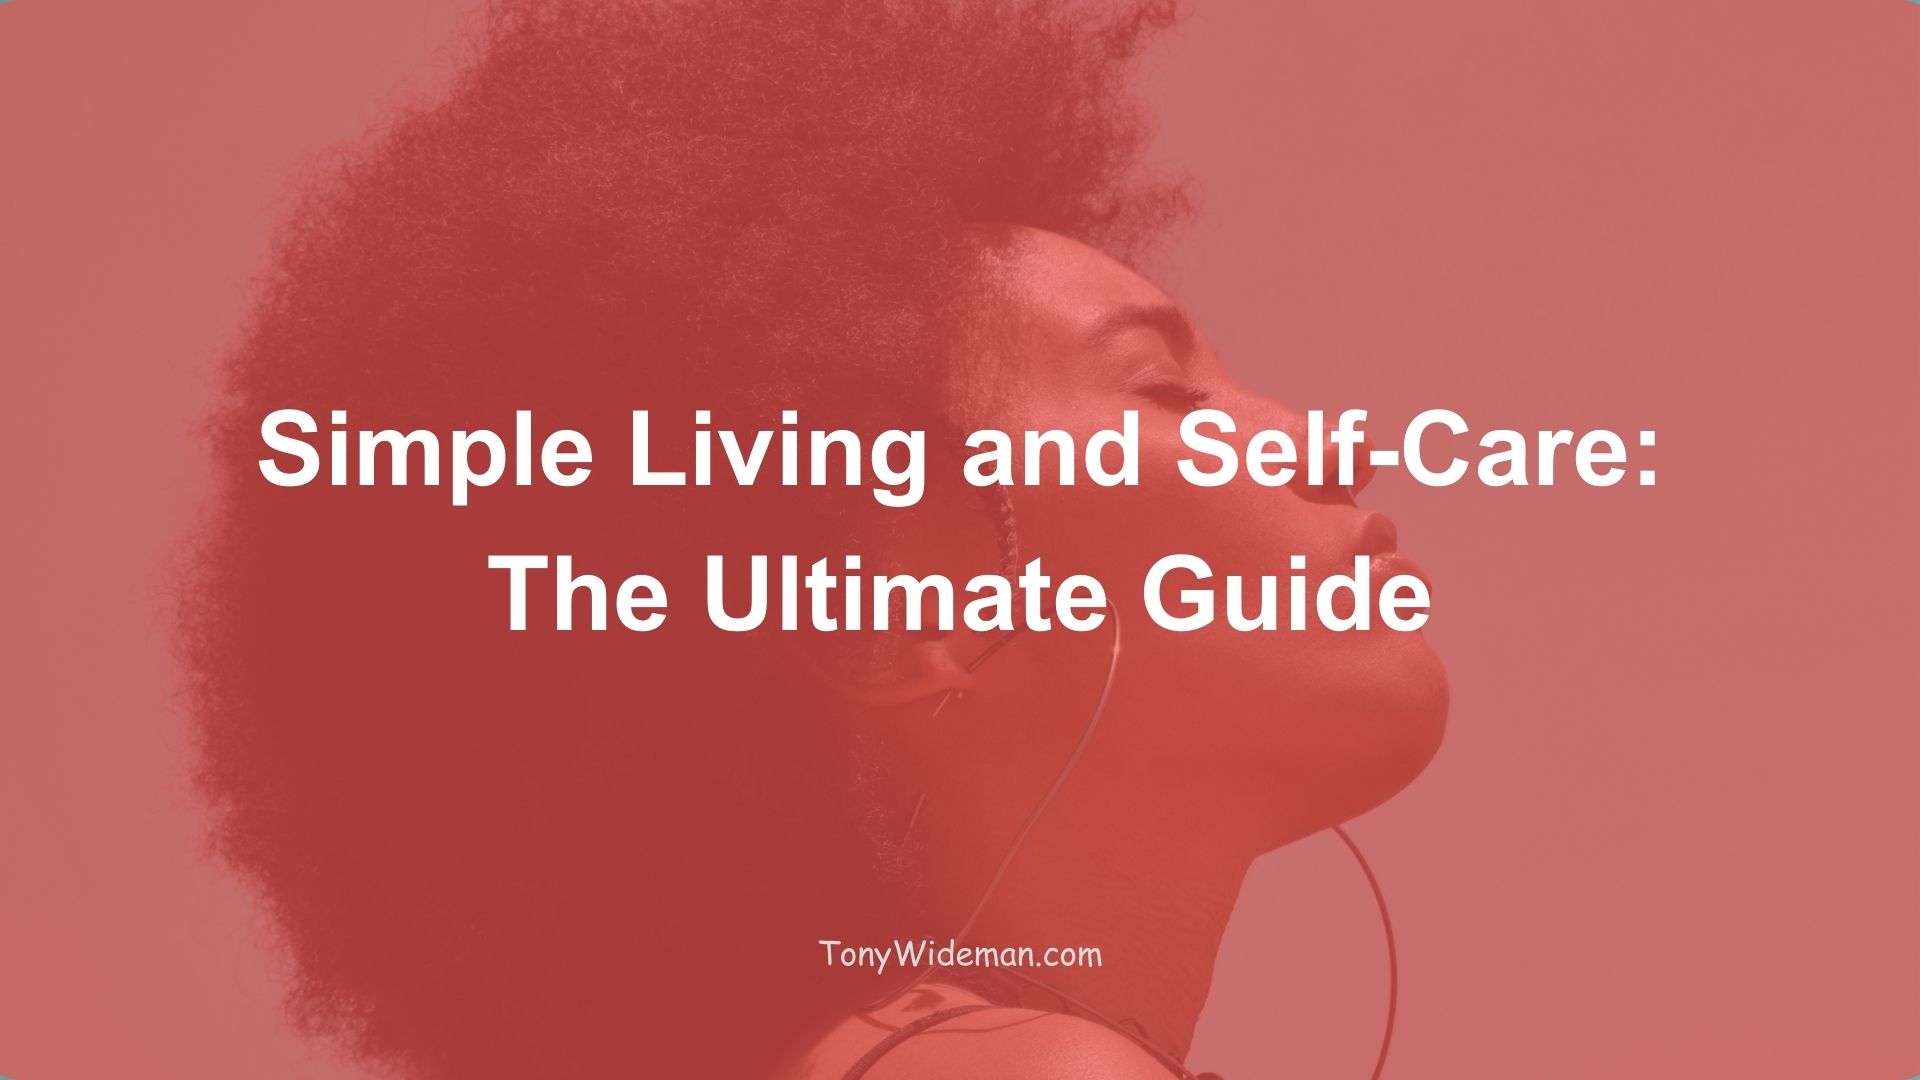 Simple Living and Self-Care: The Ultimate Guide